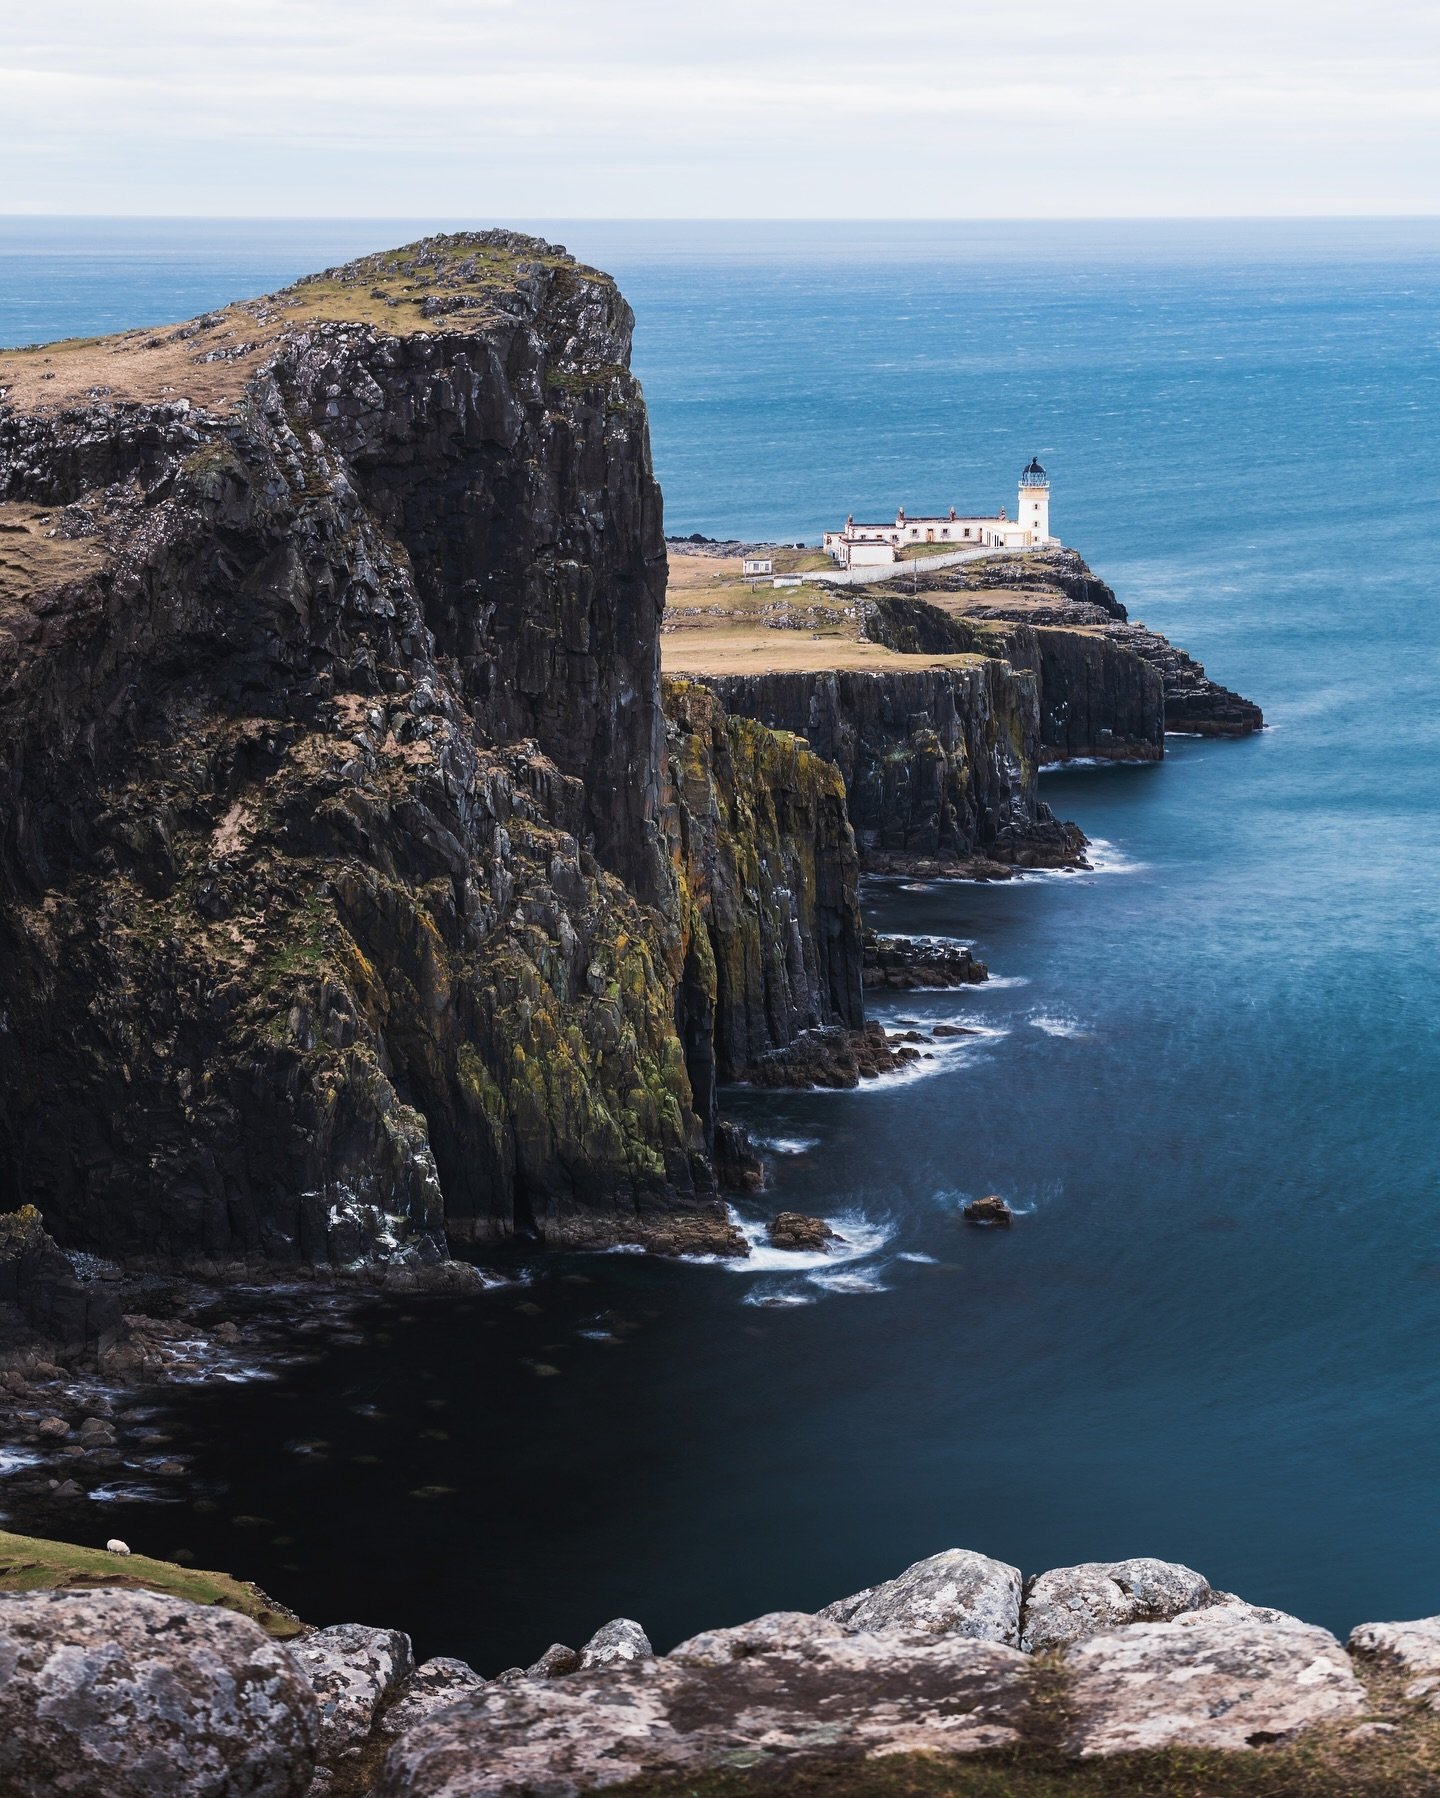 Neist point lighthouse, located on the westerly tip of Skye. We arrived hoping for a beautiful sunset (some of us more hopeful than others) but ended up with a flat overcast few hours. Still, it was nice to shoot this stunning location and break out 